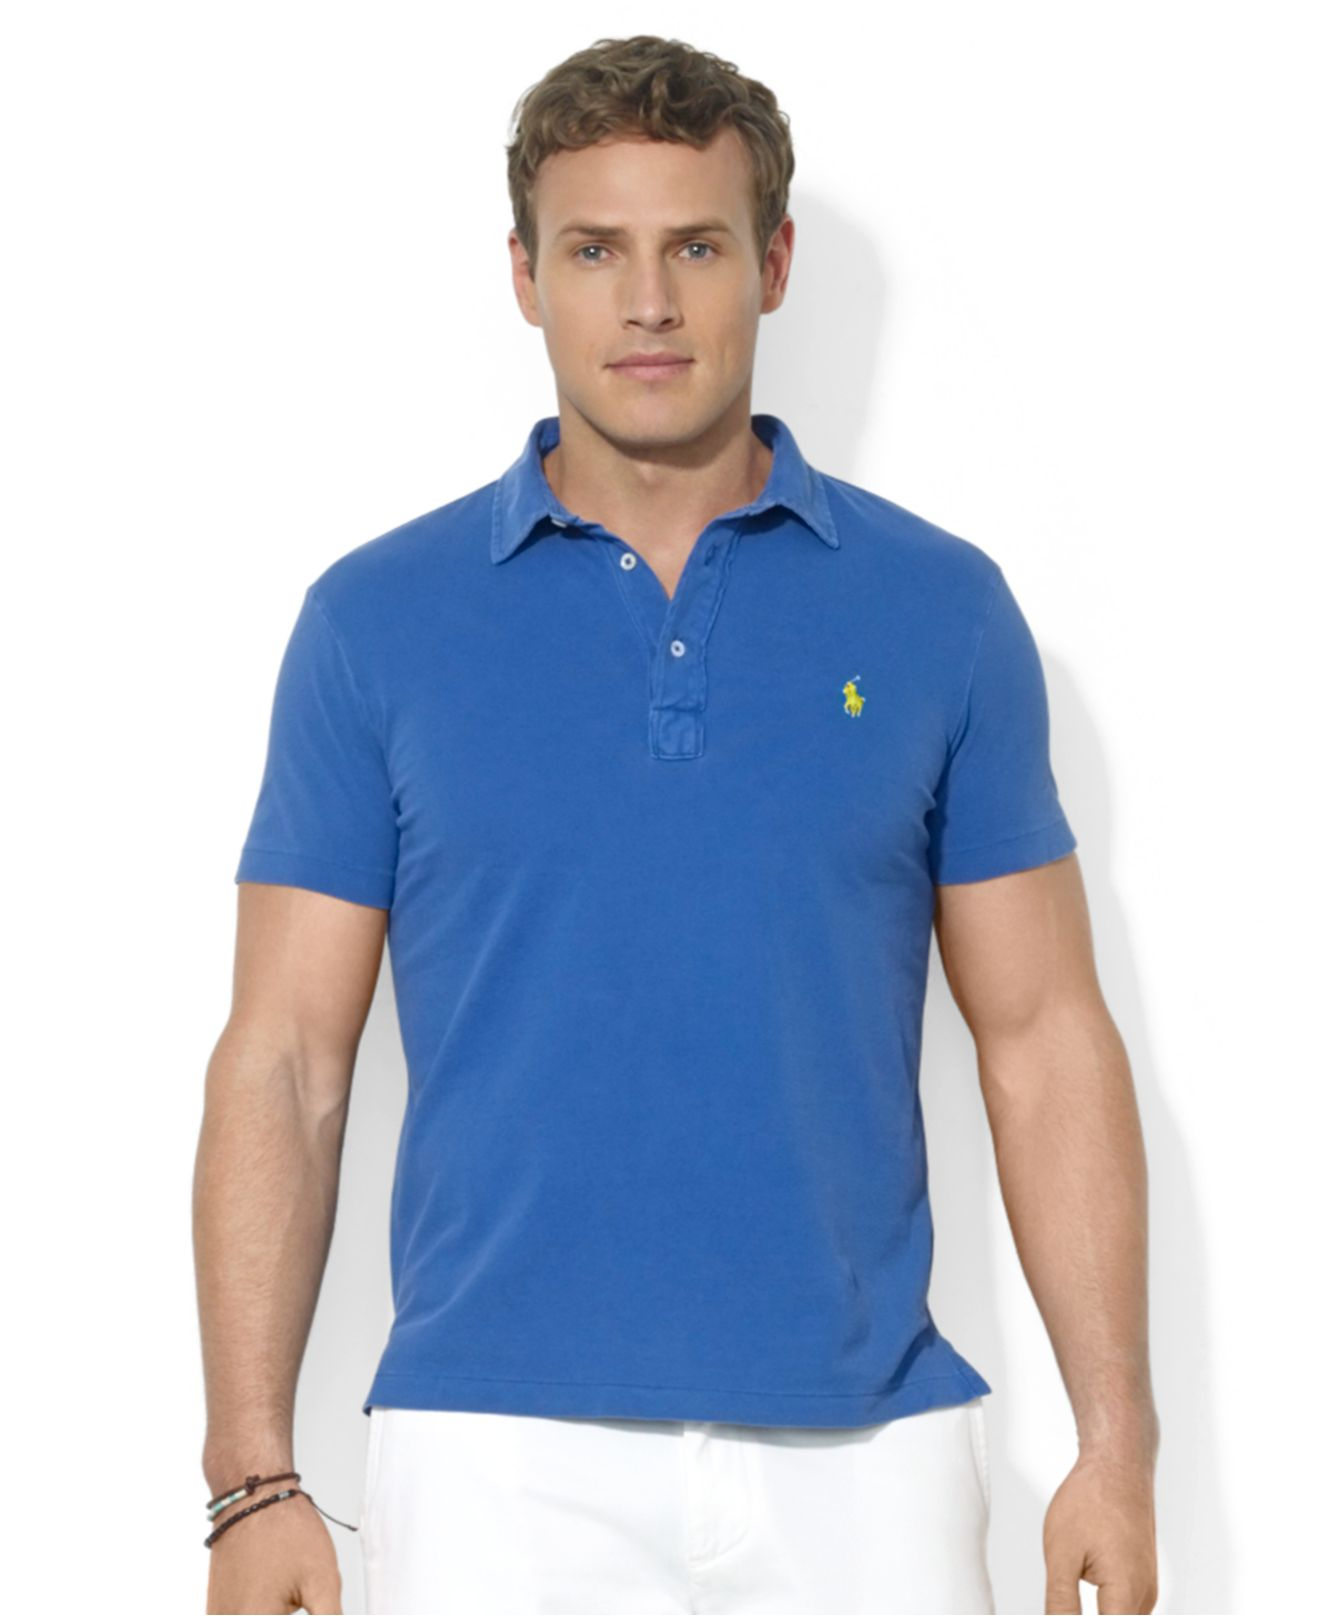 Lyst - Polo Ralph Lauren Polo Big and Tall Solid Featherweight Mesh ...